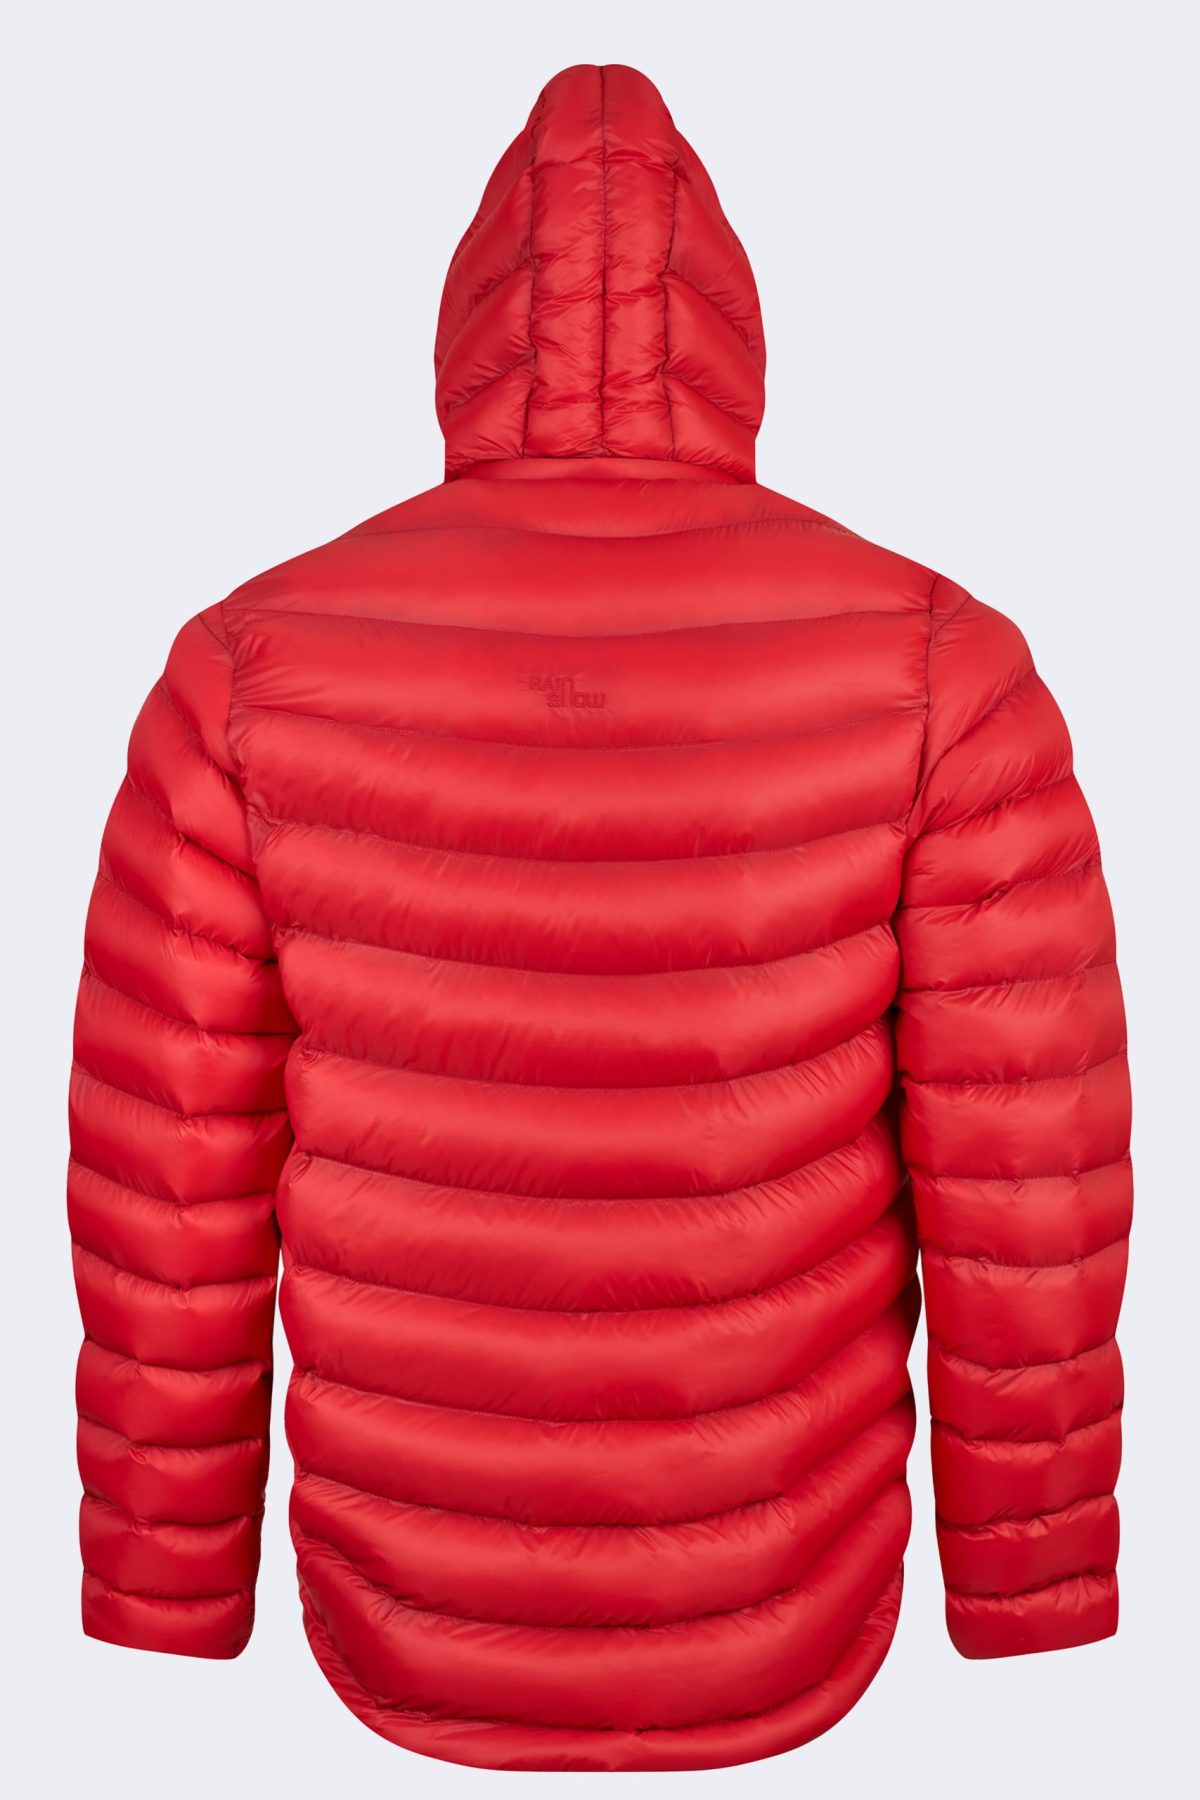 Men's Hooded Nylon Inflatable Jacket – Red-2148